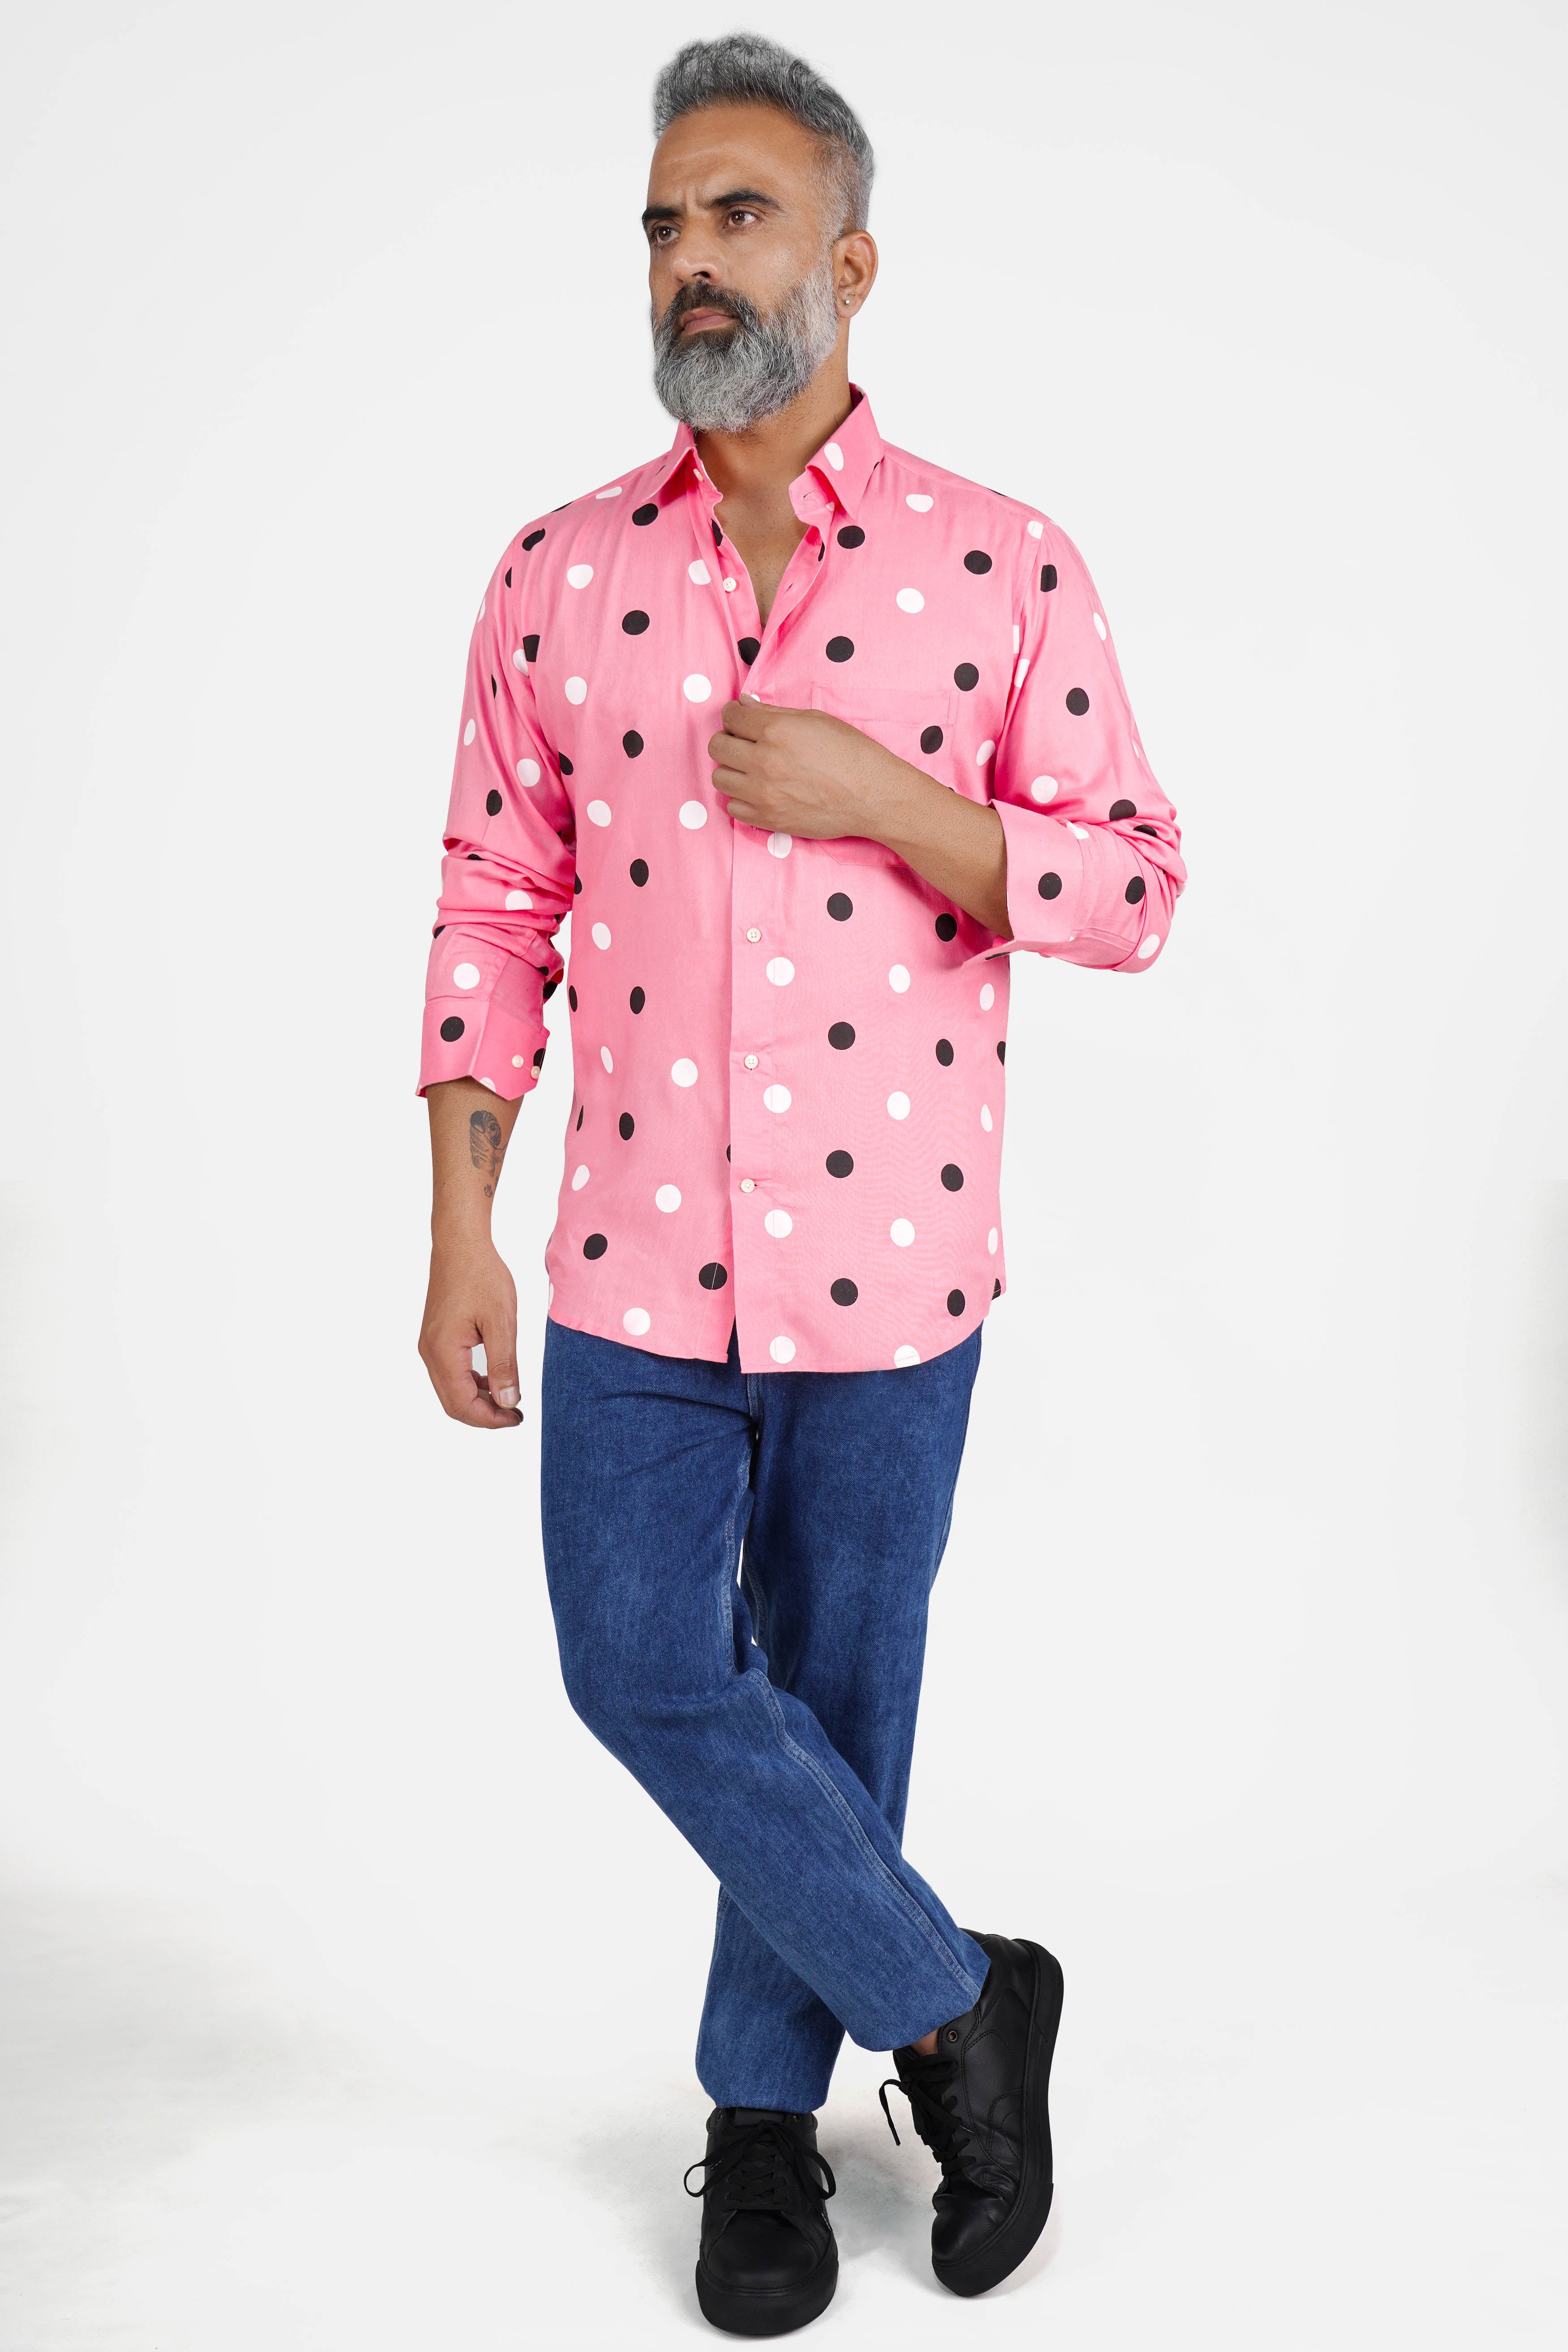 Flamingo Pink with Black and White Polka Dotted Premium Tencel Shirt